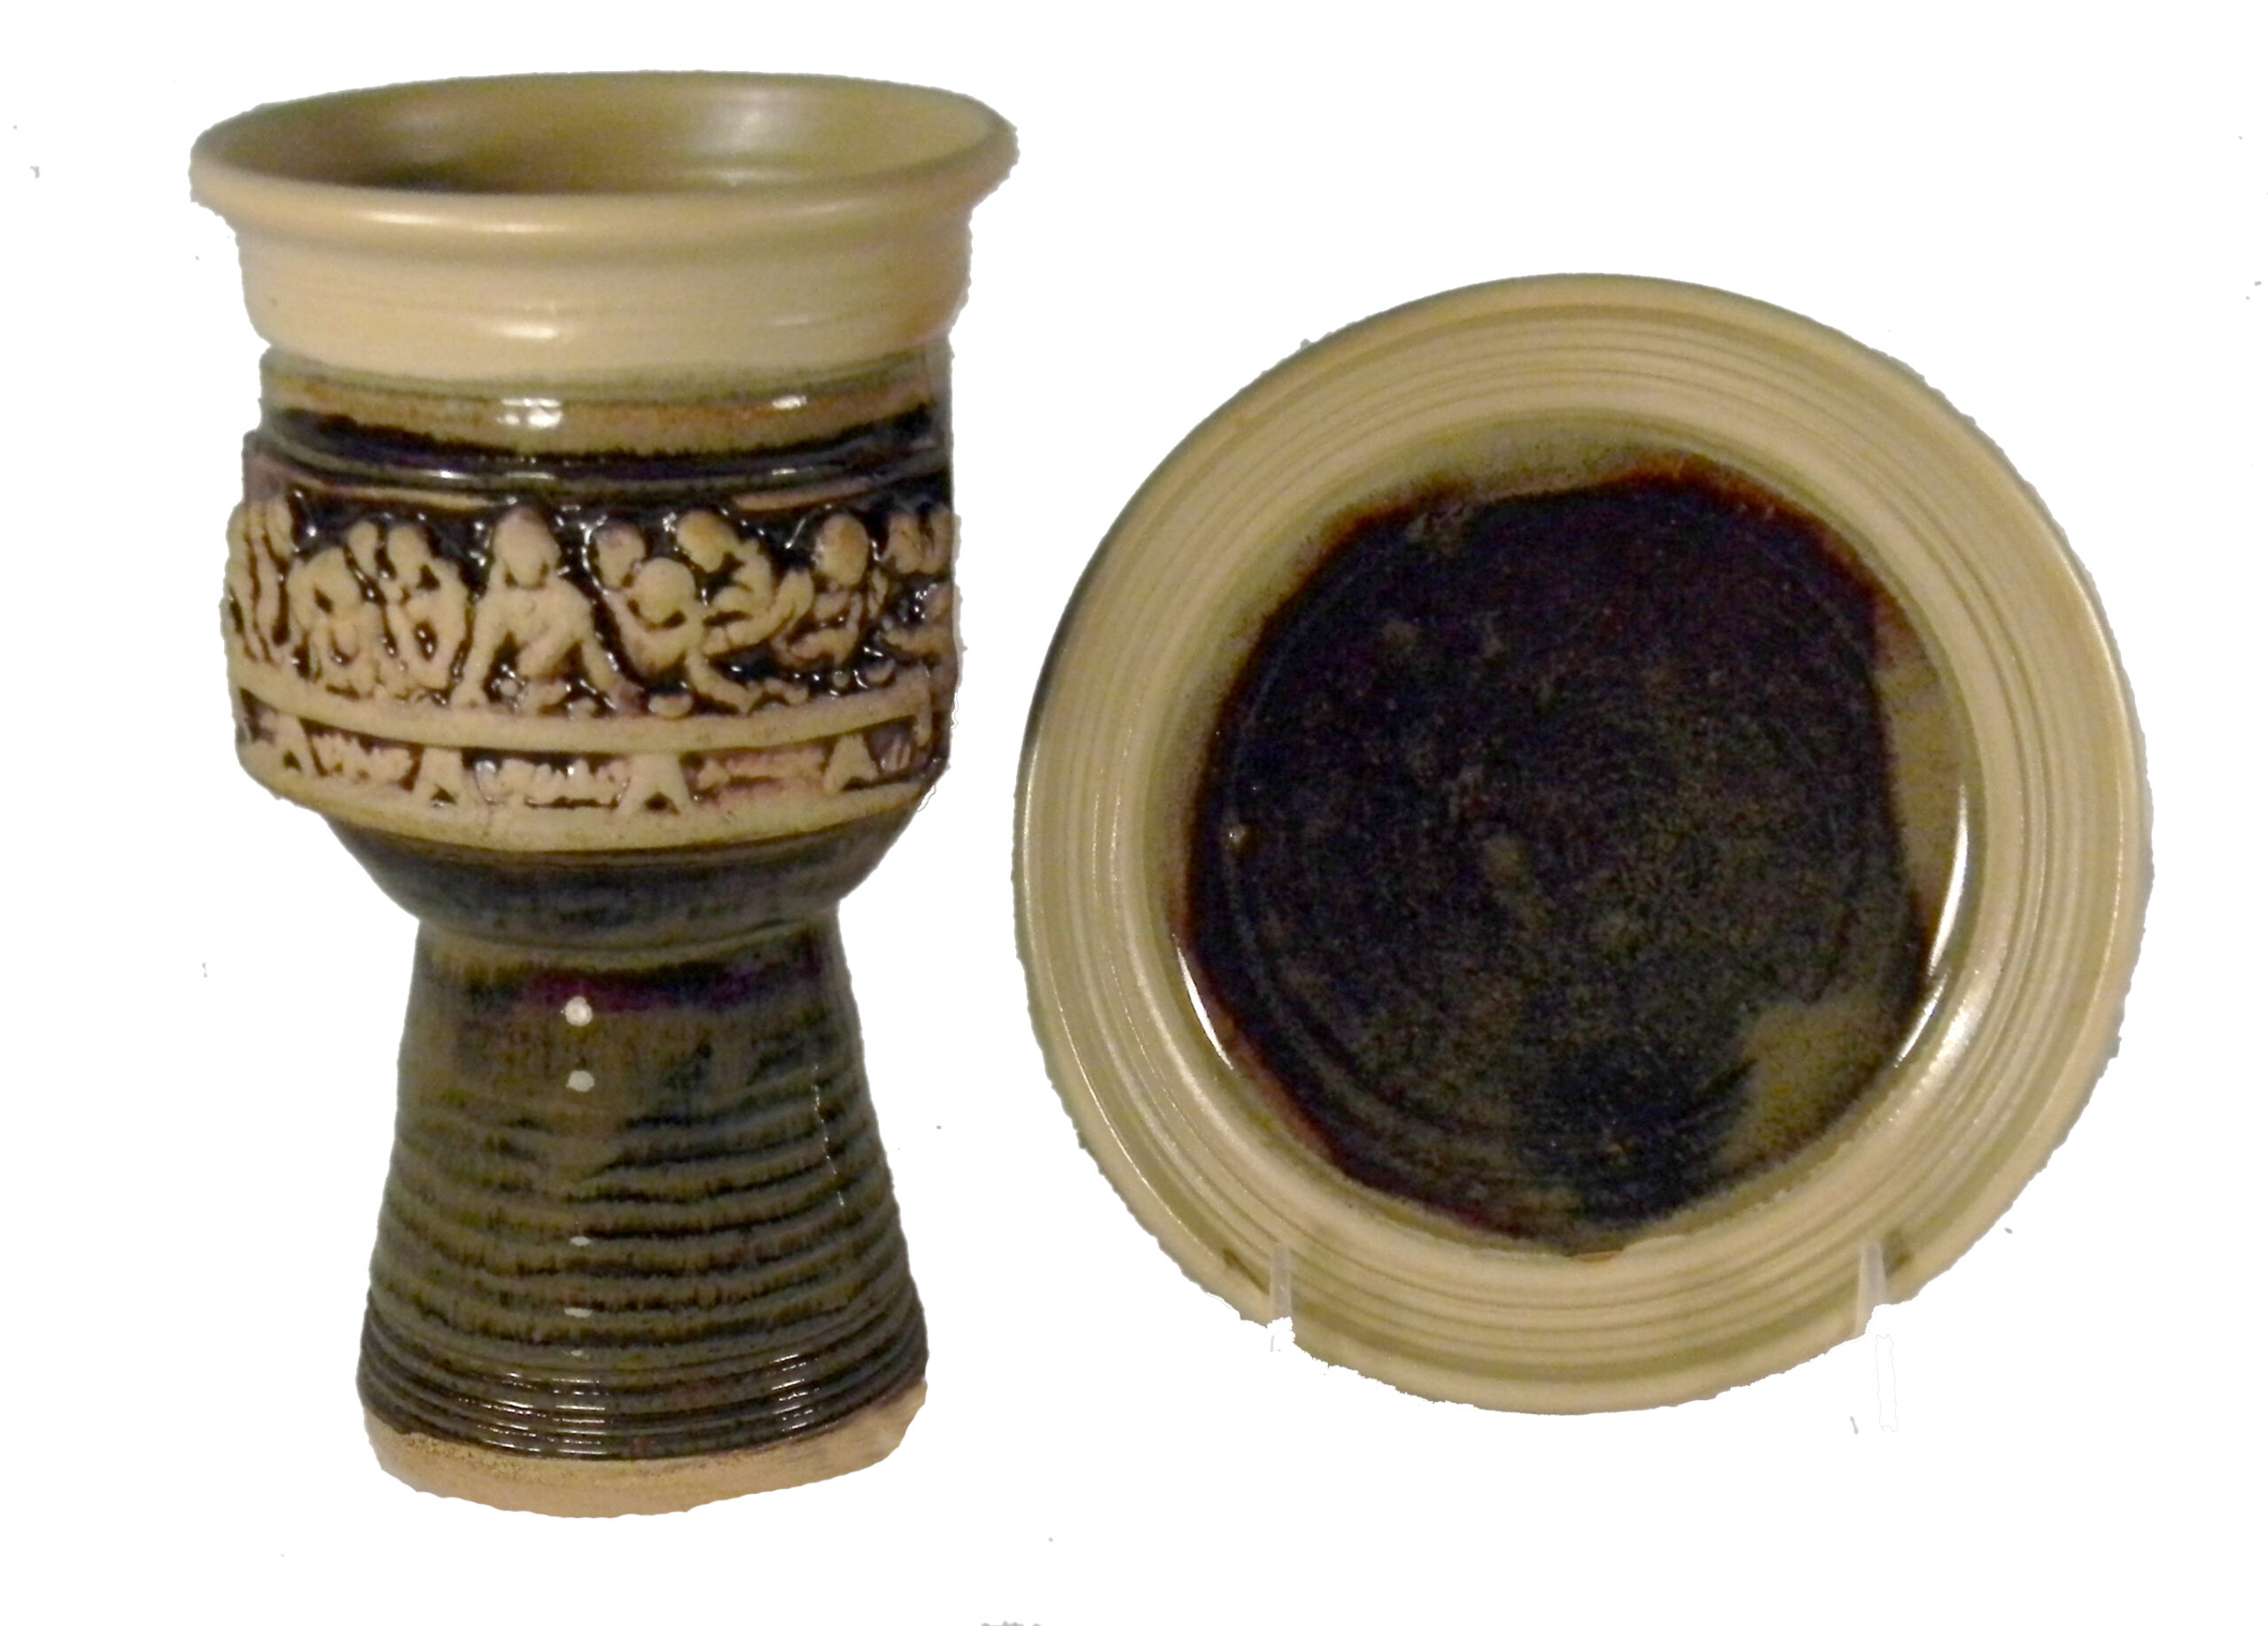 Last Supper Chalice and Paten Set